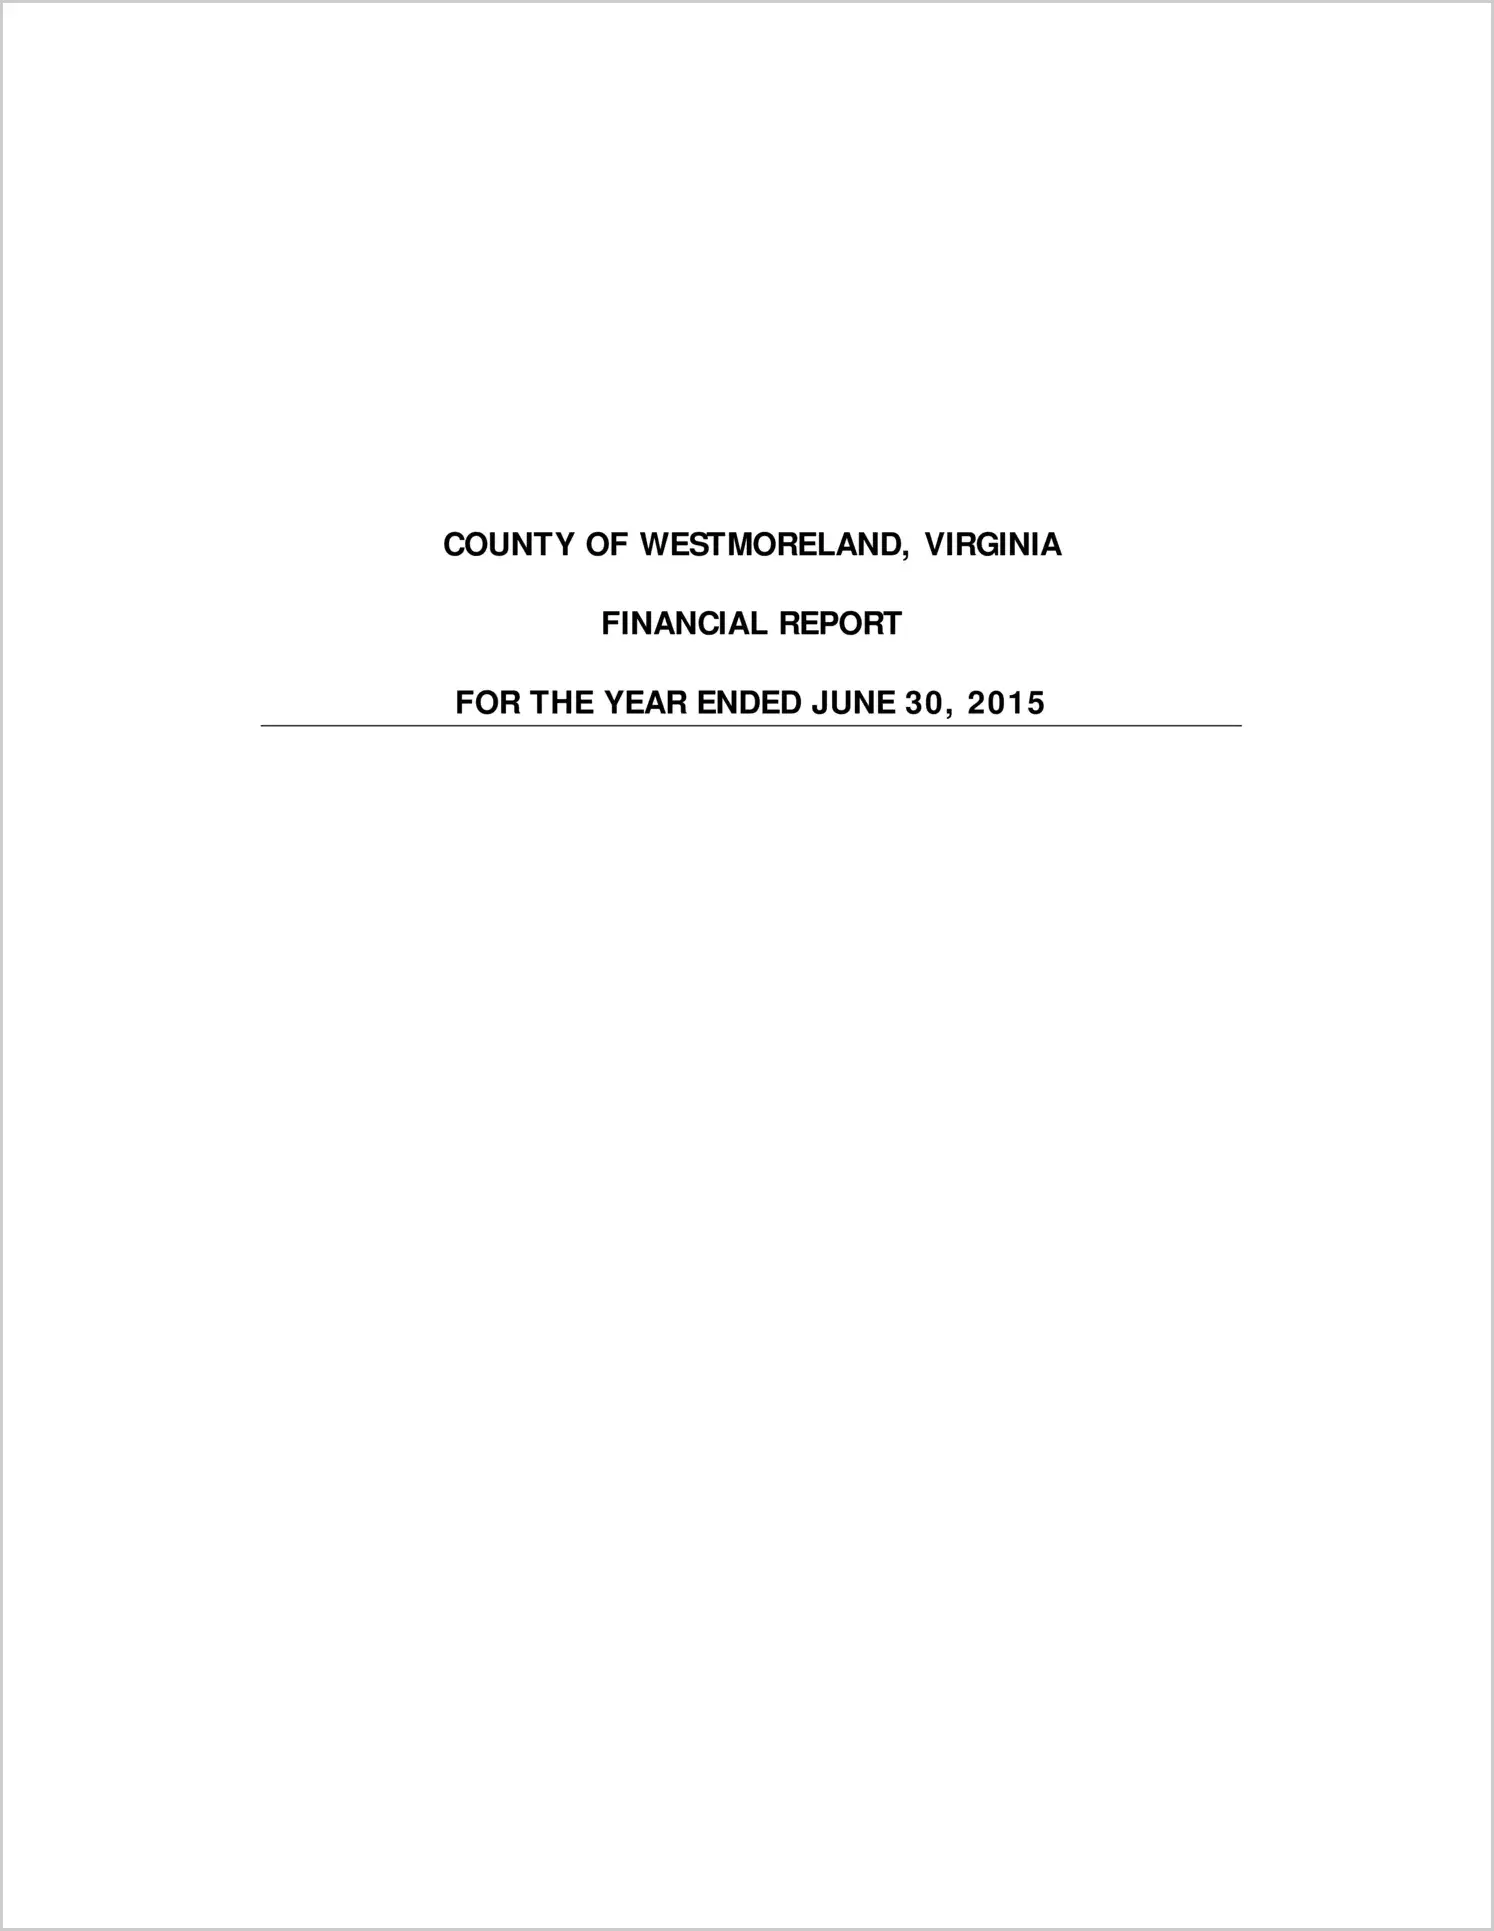 2015 Annual Financial Report for County of Westmoreland